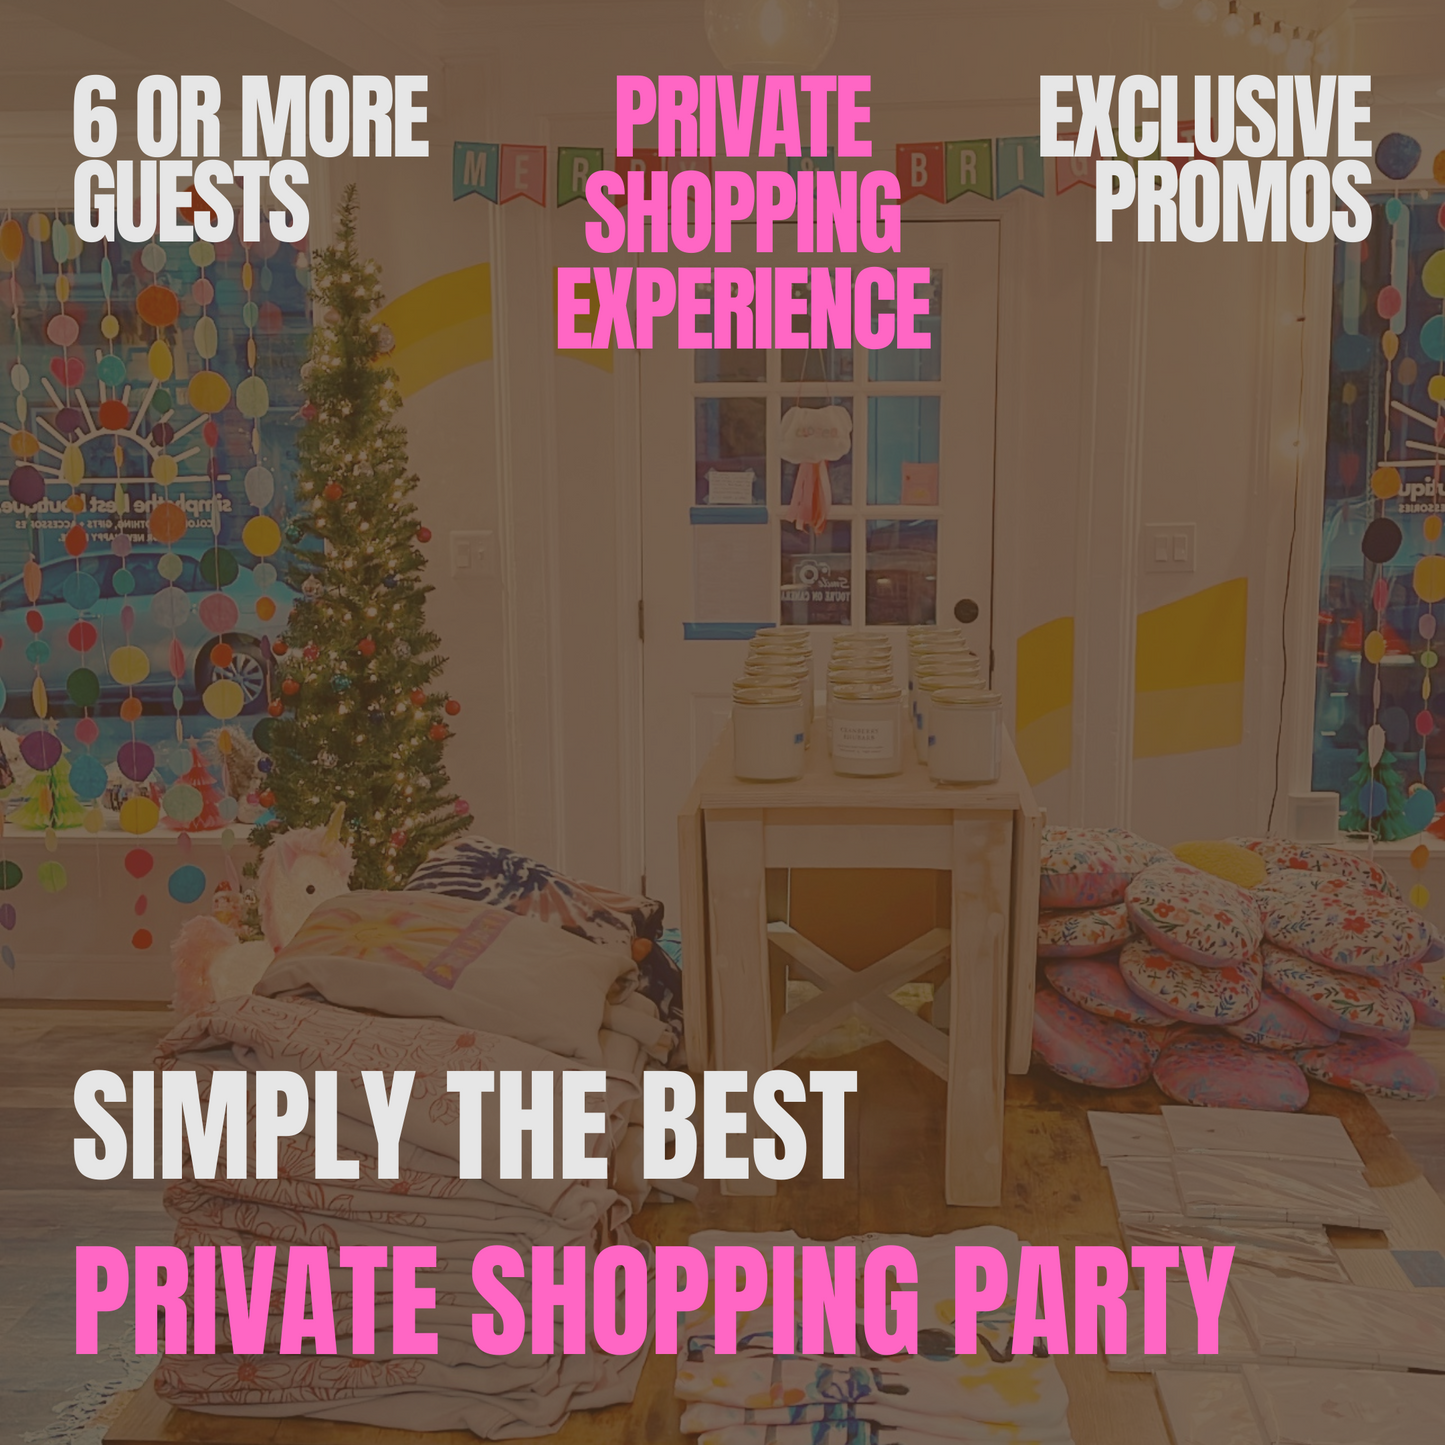 STB Private Shopping Party